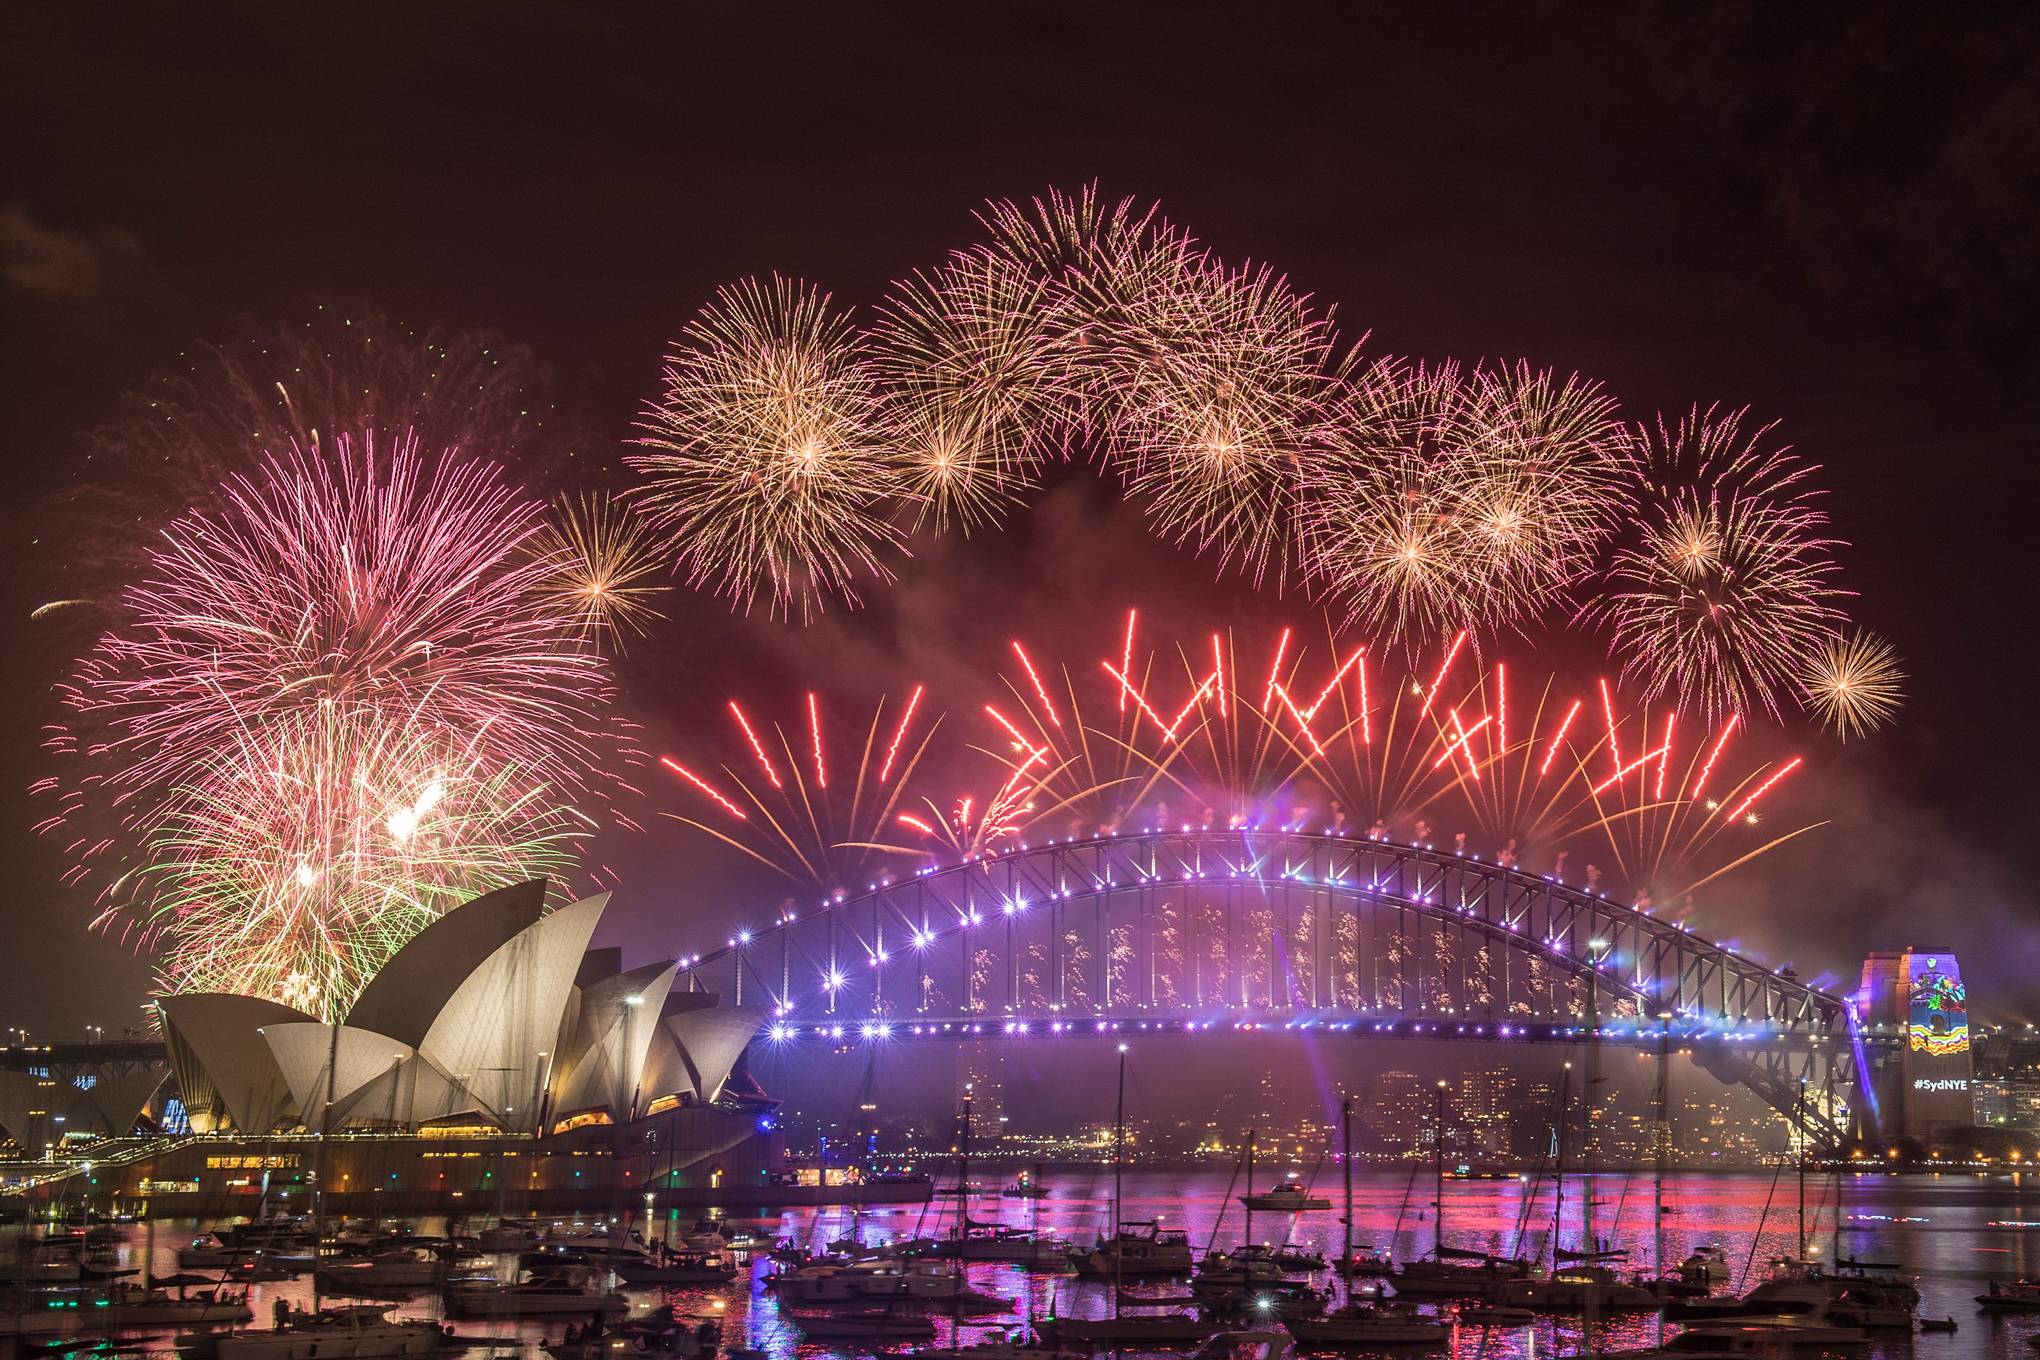 Best New Year's Eve holiday destinations 2020